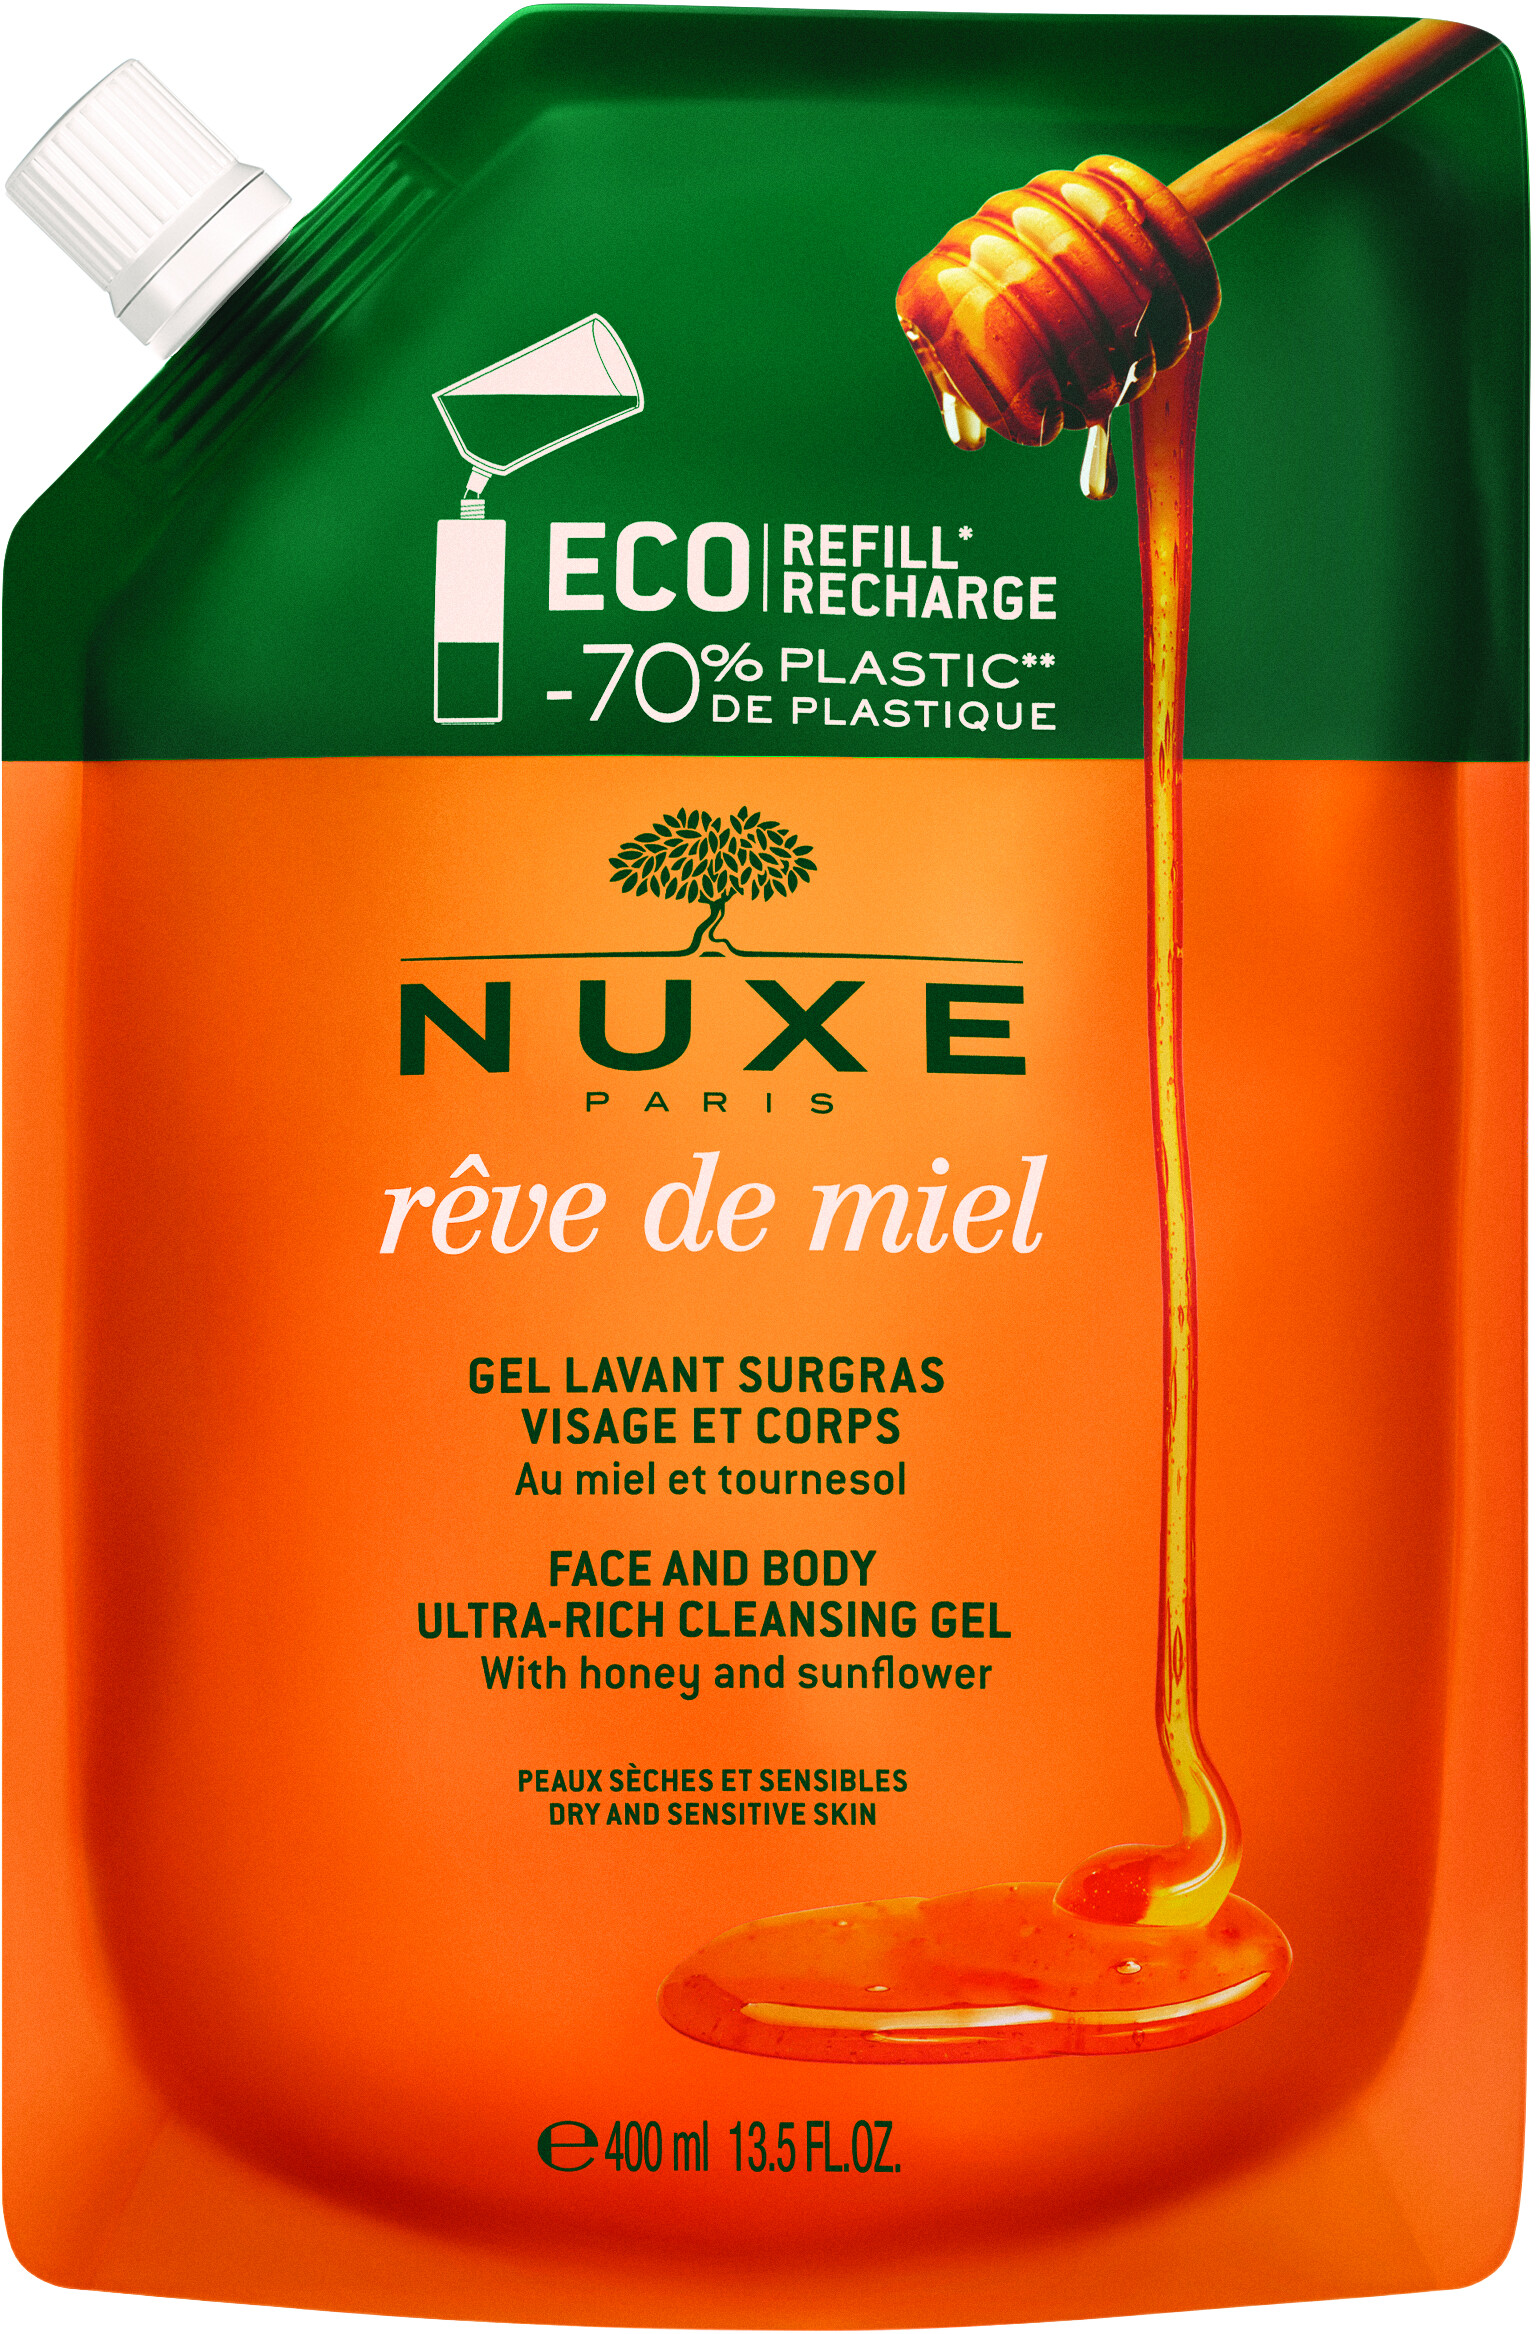 Nuxe Reve de Miel Face and Body Ultra Rich Cleansing Gel Eco Refill 400ml